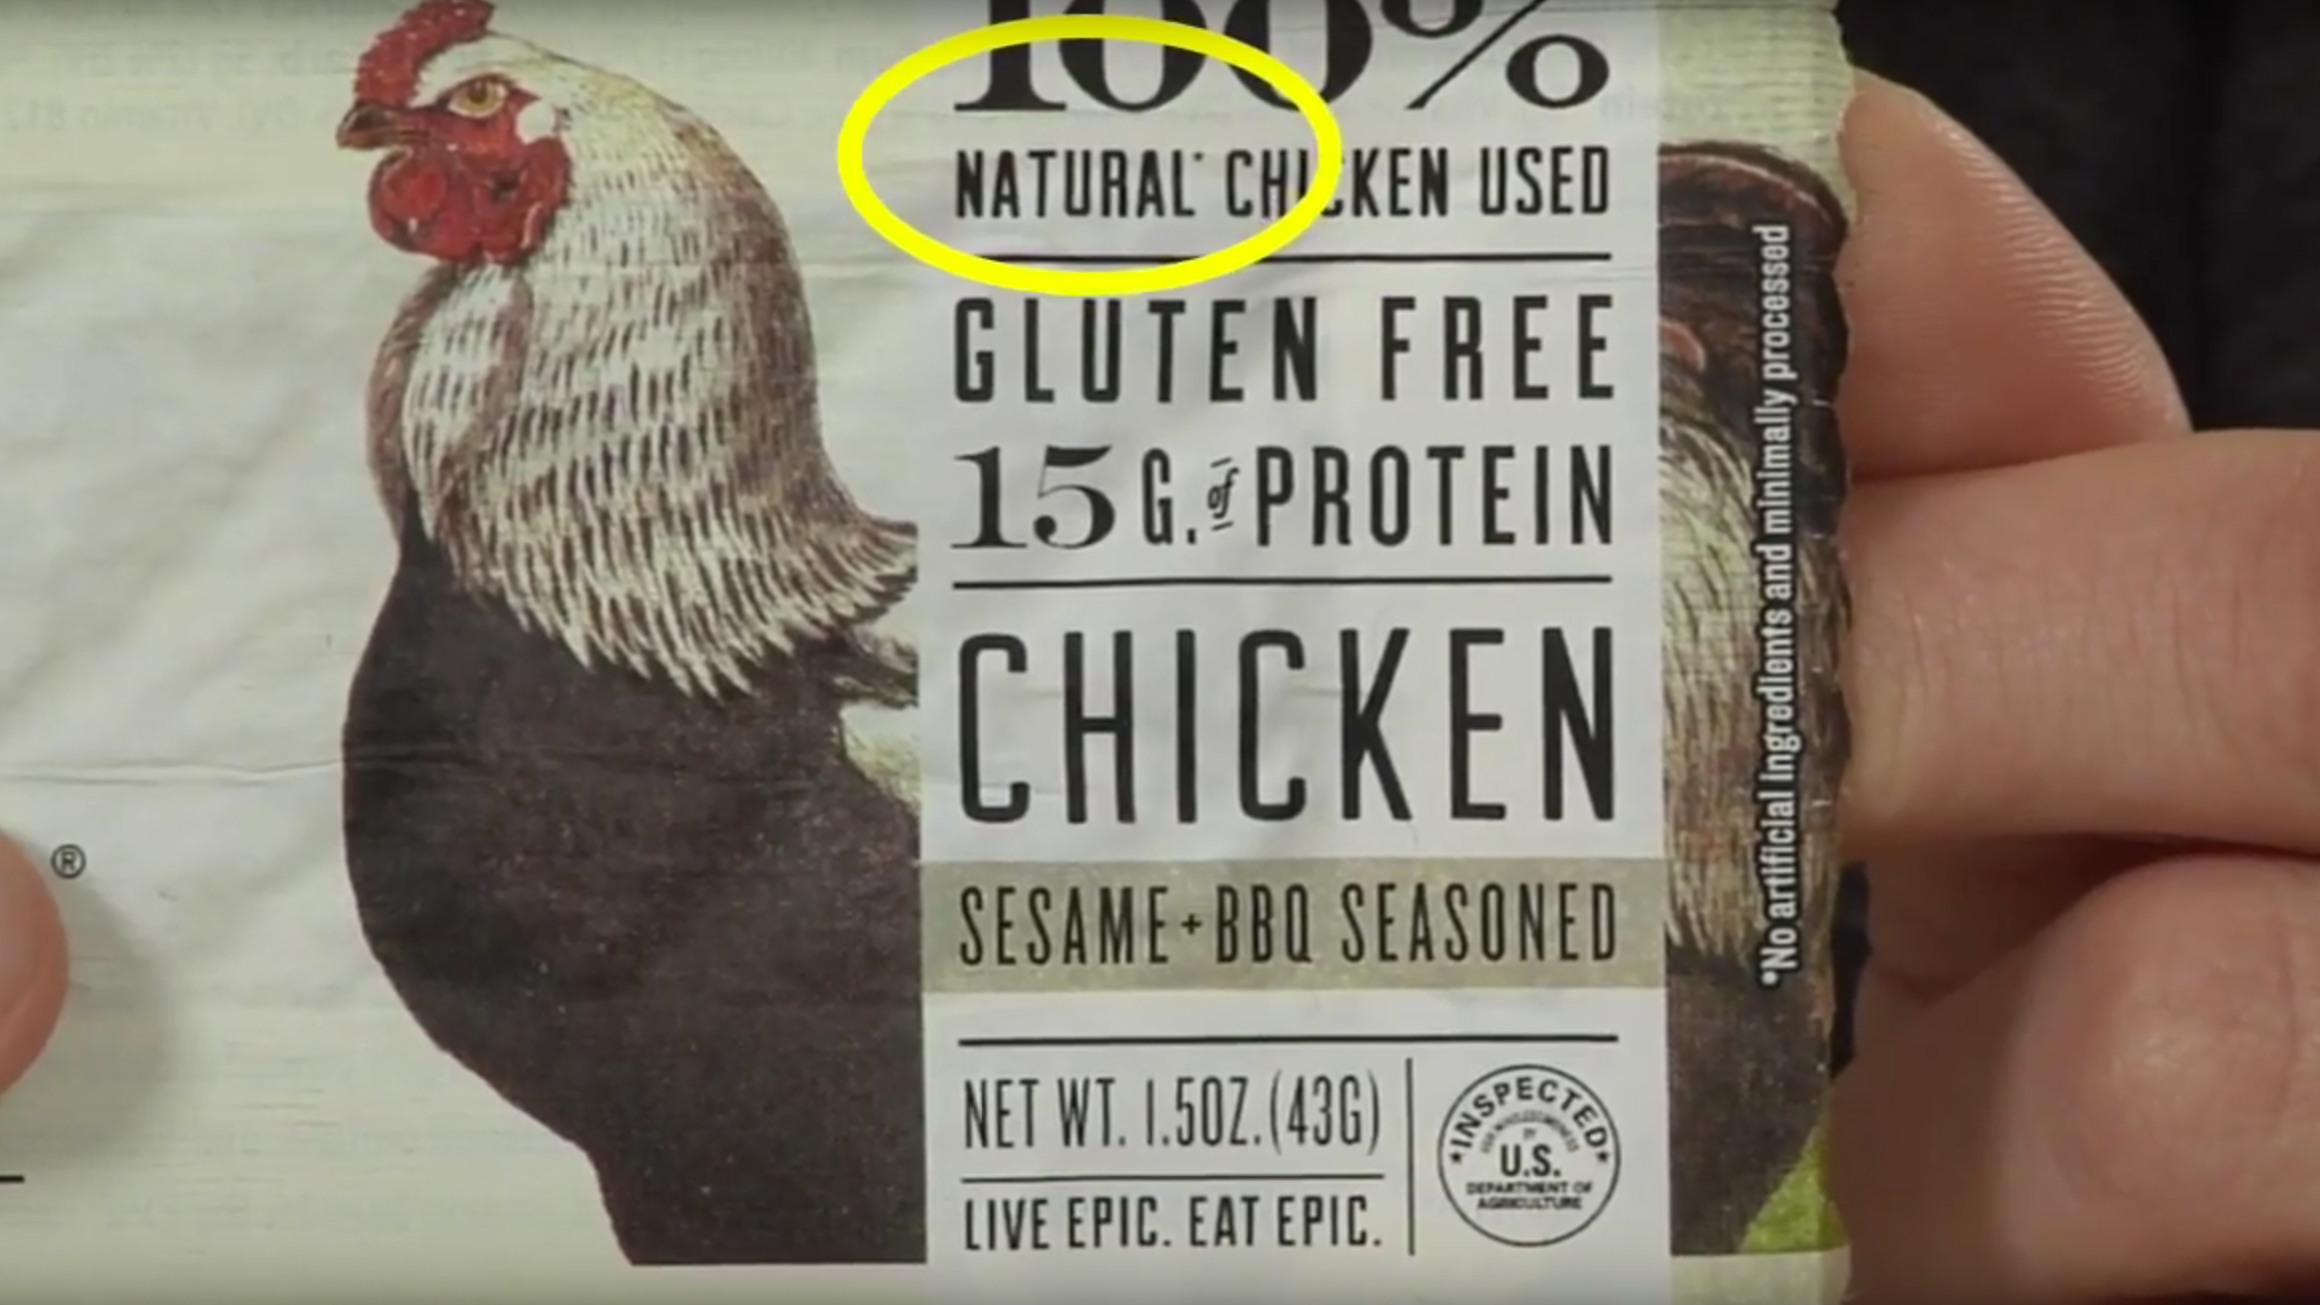 Label on package of fresh chicken displaying the "natural" claim